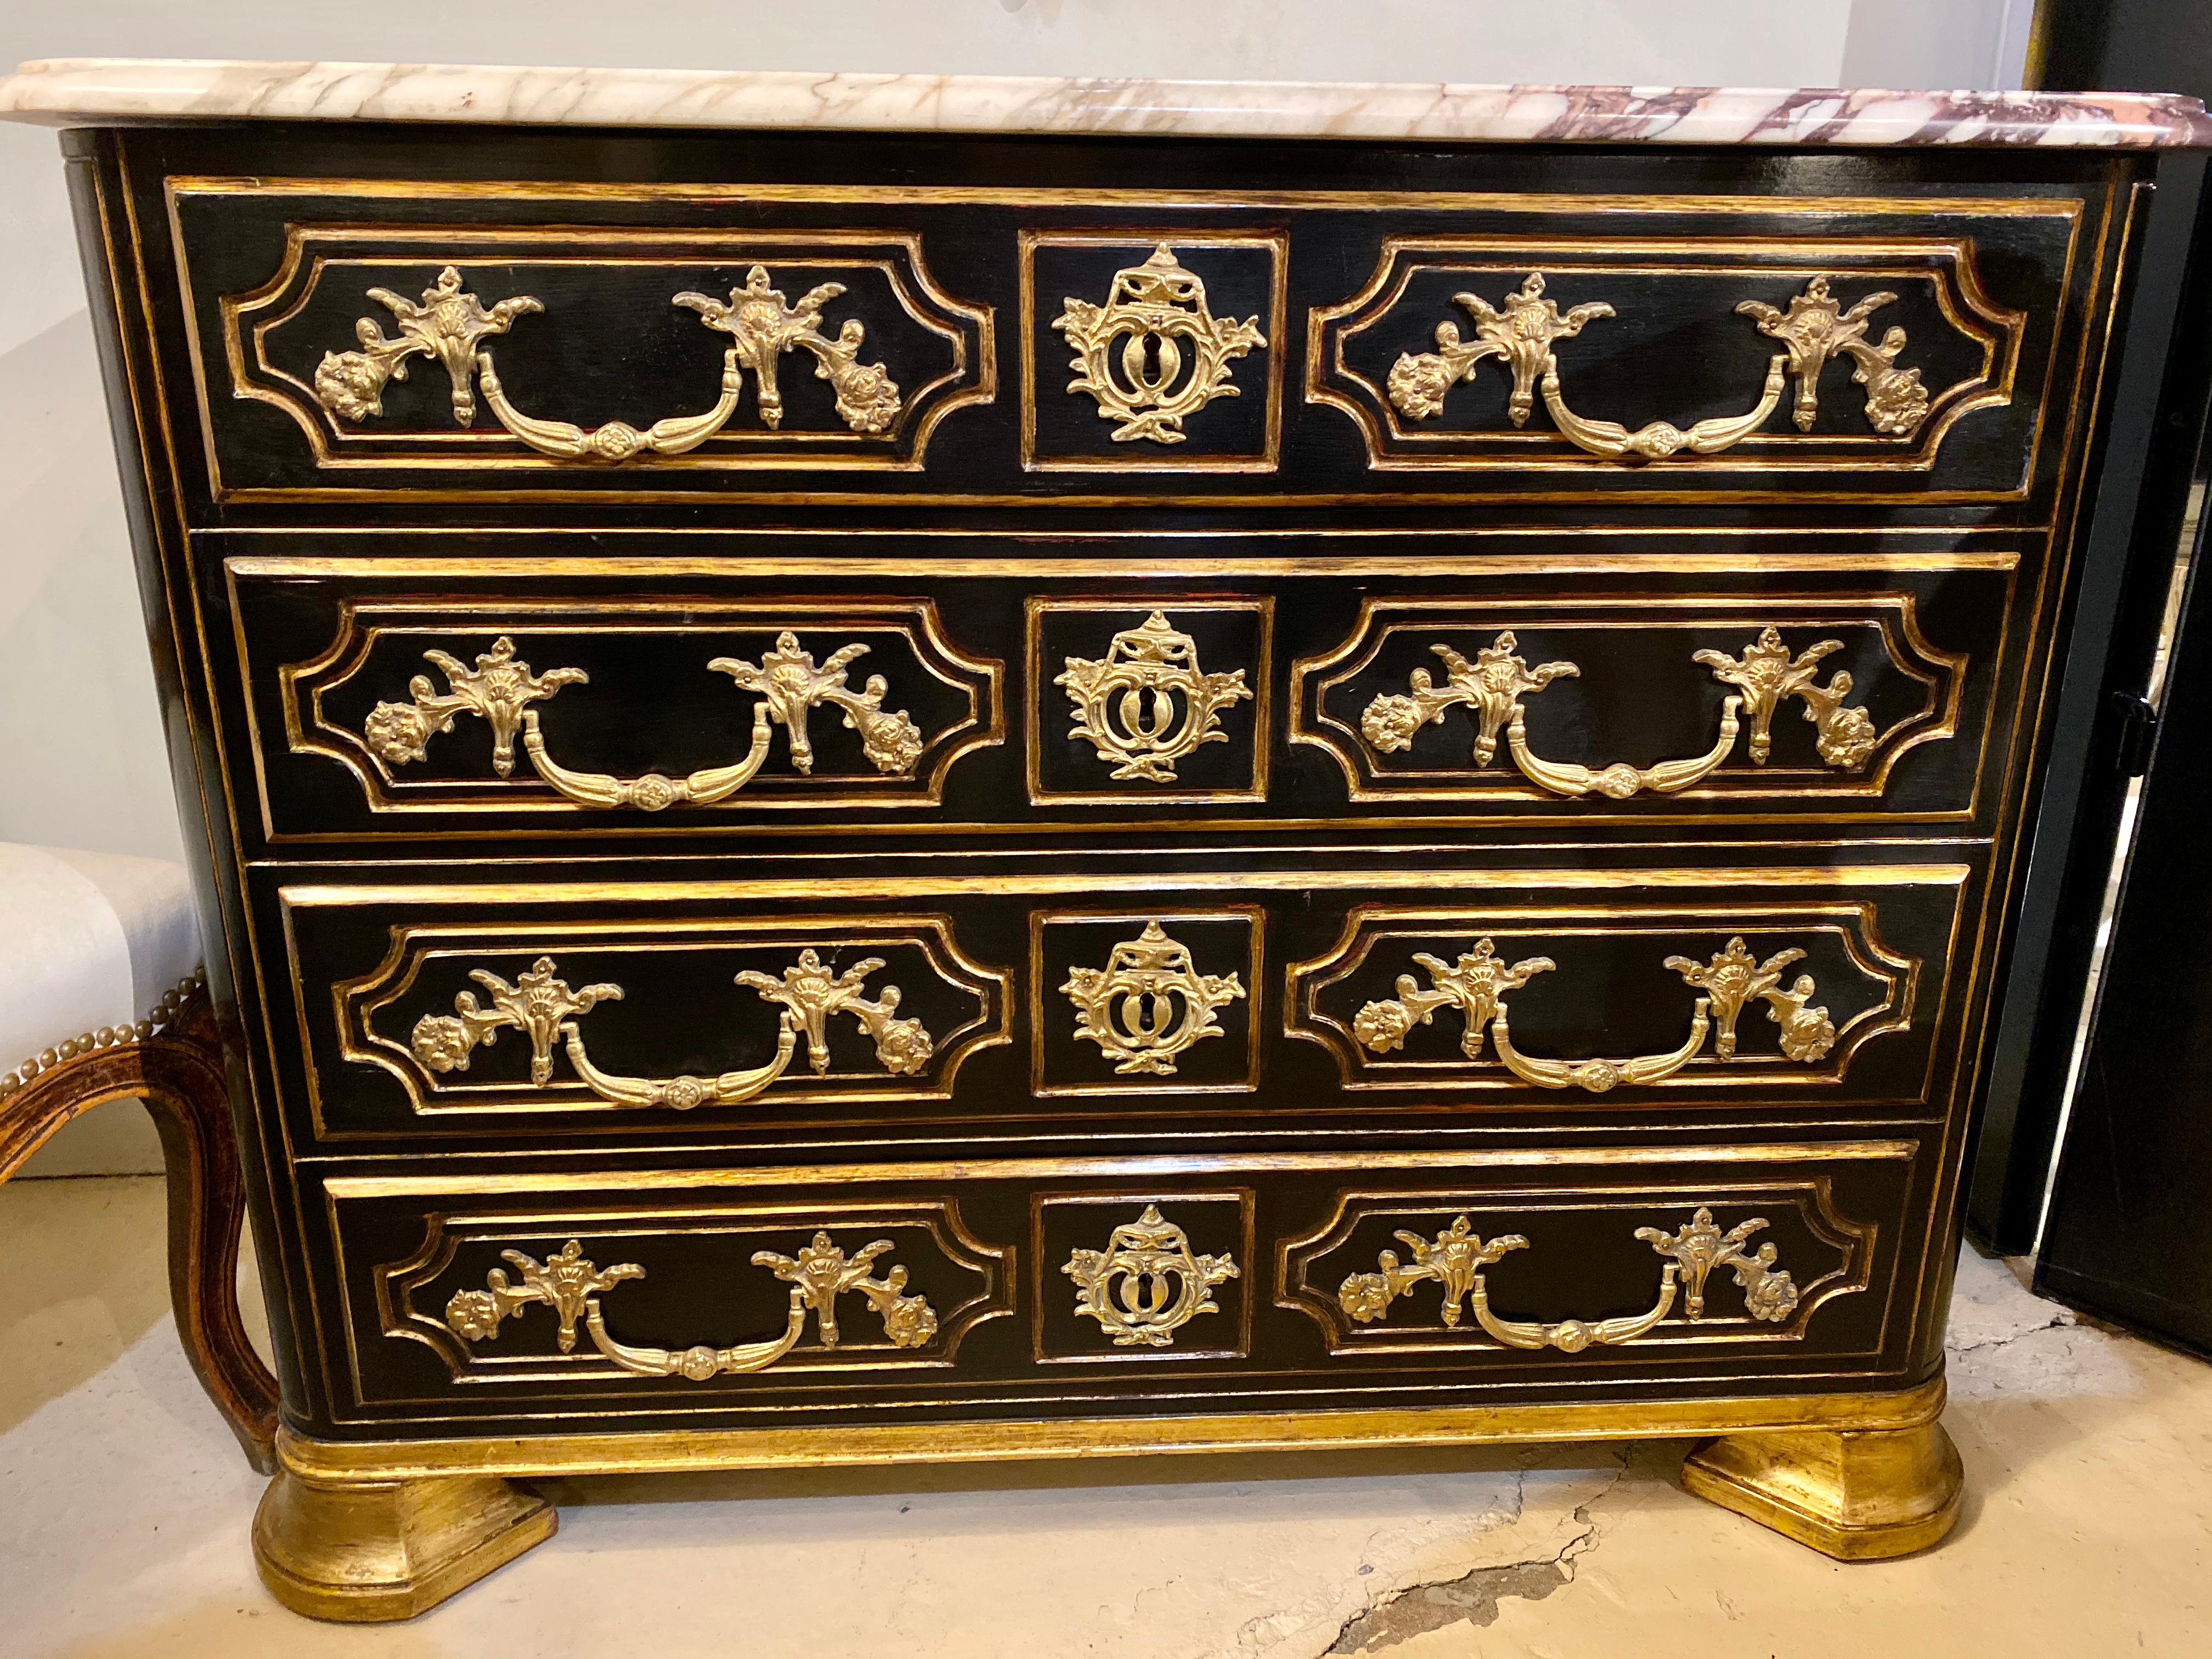 An alluring French Directoire style chest of drawers, circa 1930, a beveled white and rouge veined marble top a conforming ebonized case enclosed with four drawers, each decorated with gilt-banding and ornate bronze pulls, all oak interiors, raised